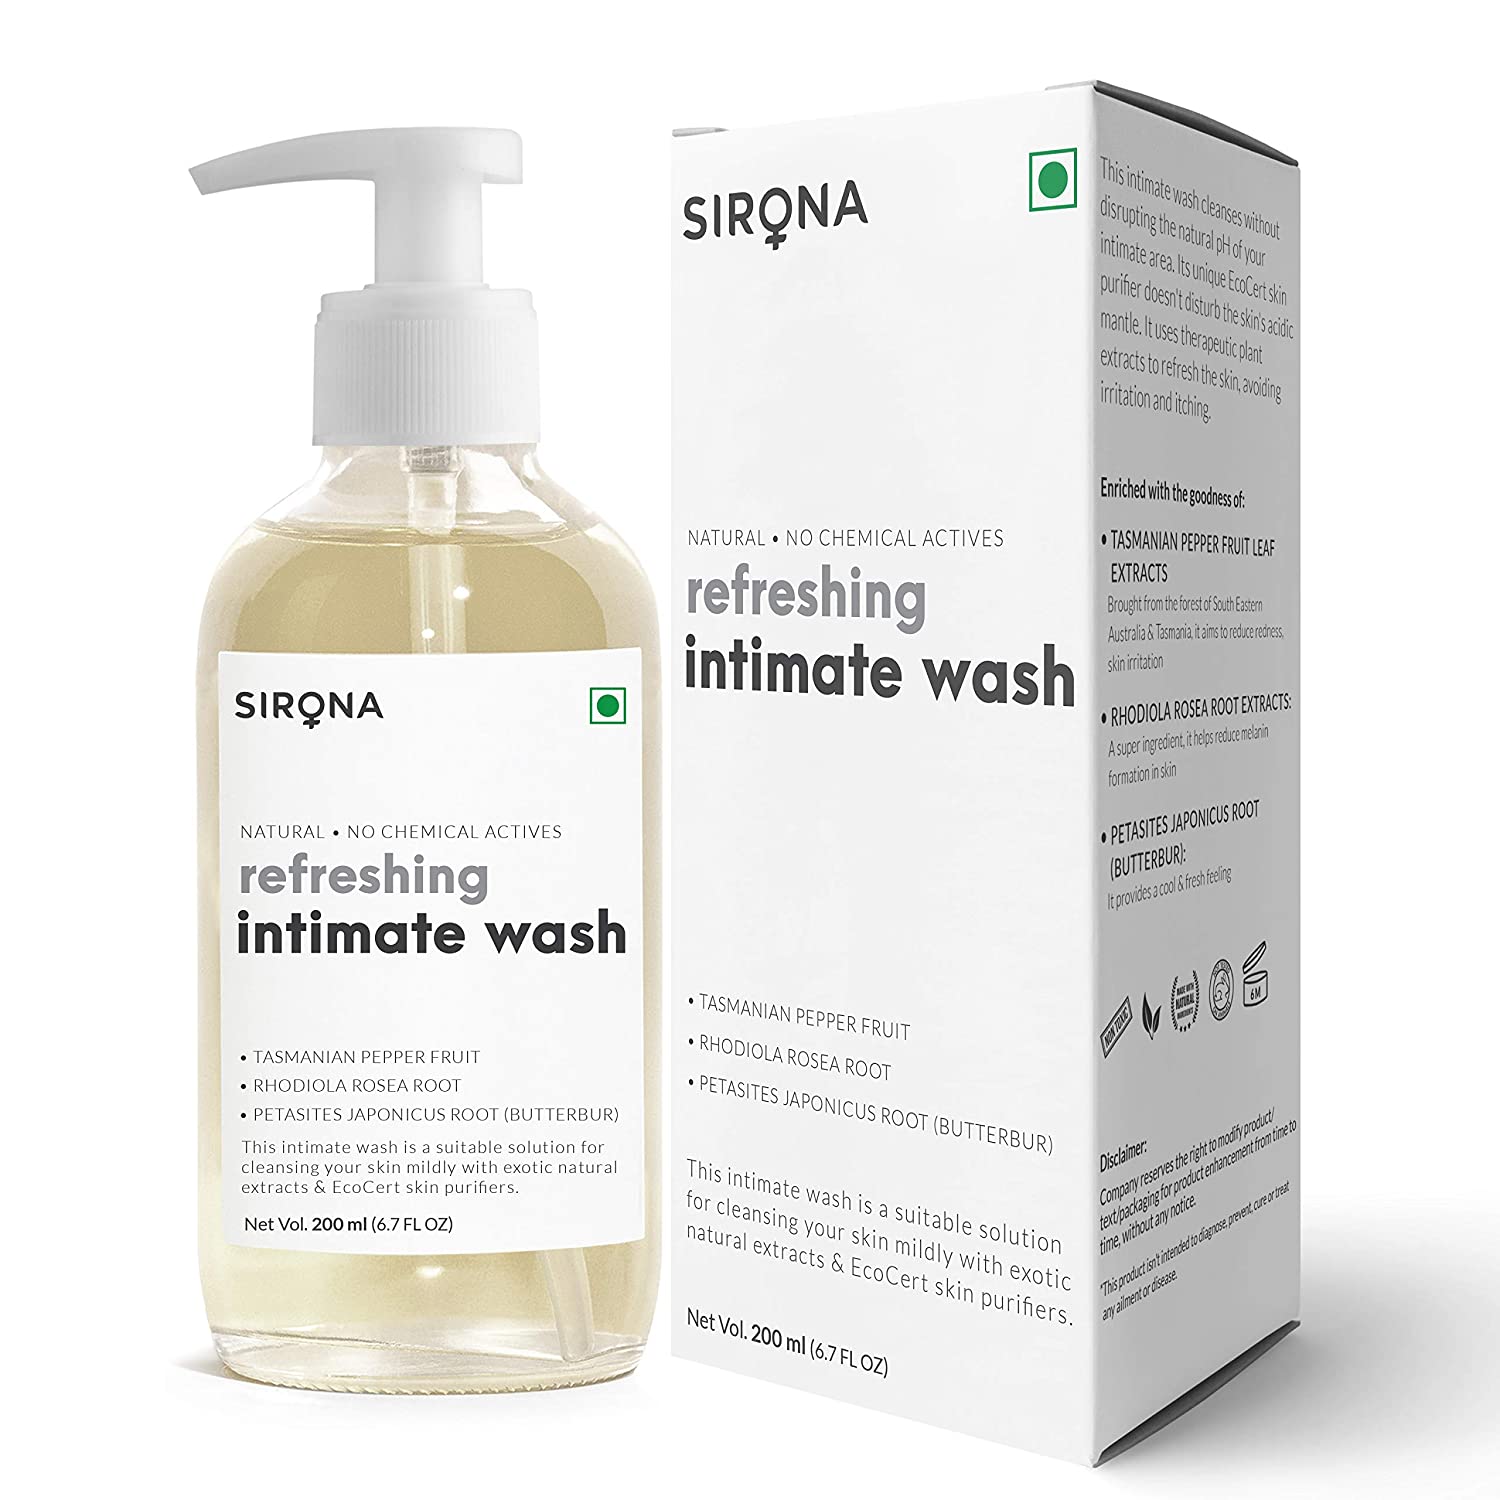 Sirona Natural Intimate Wash - 200 ml, Prevents Bad Odour, Itching & Irritation  ST0108